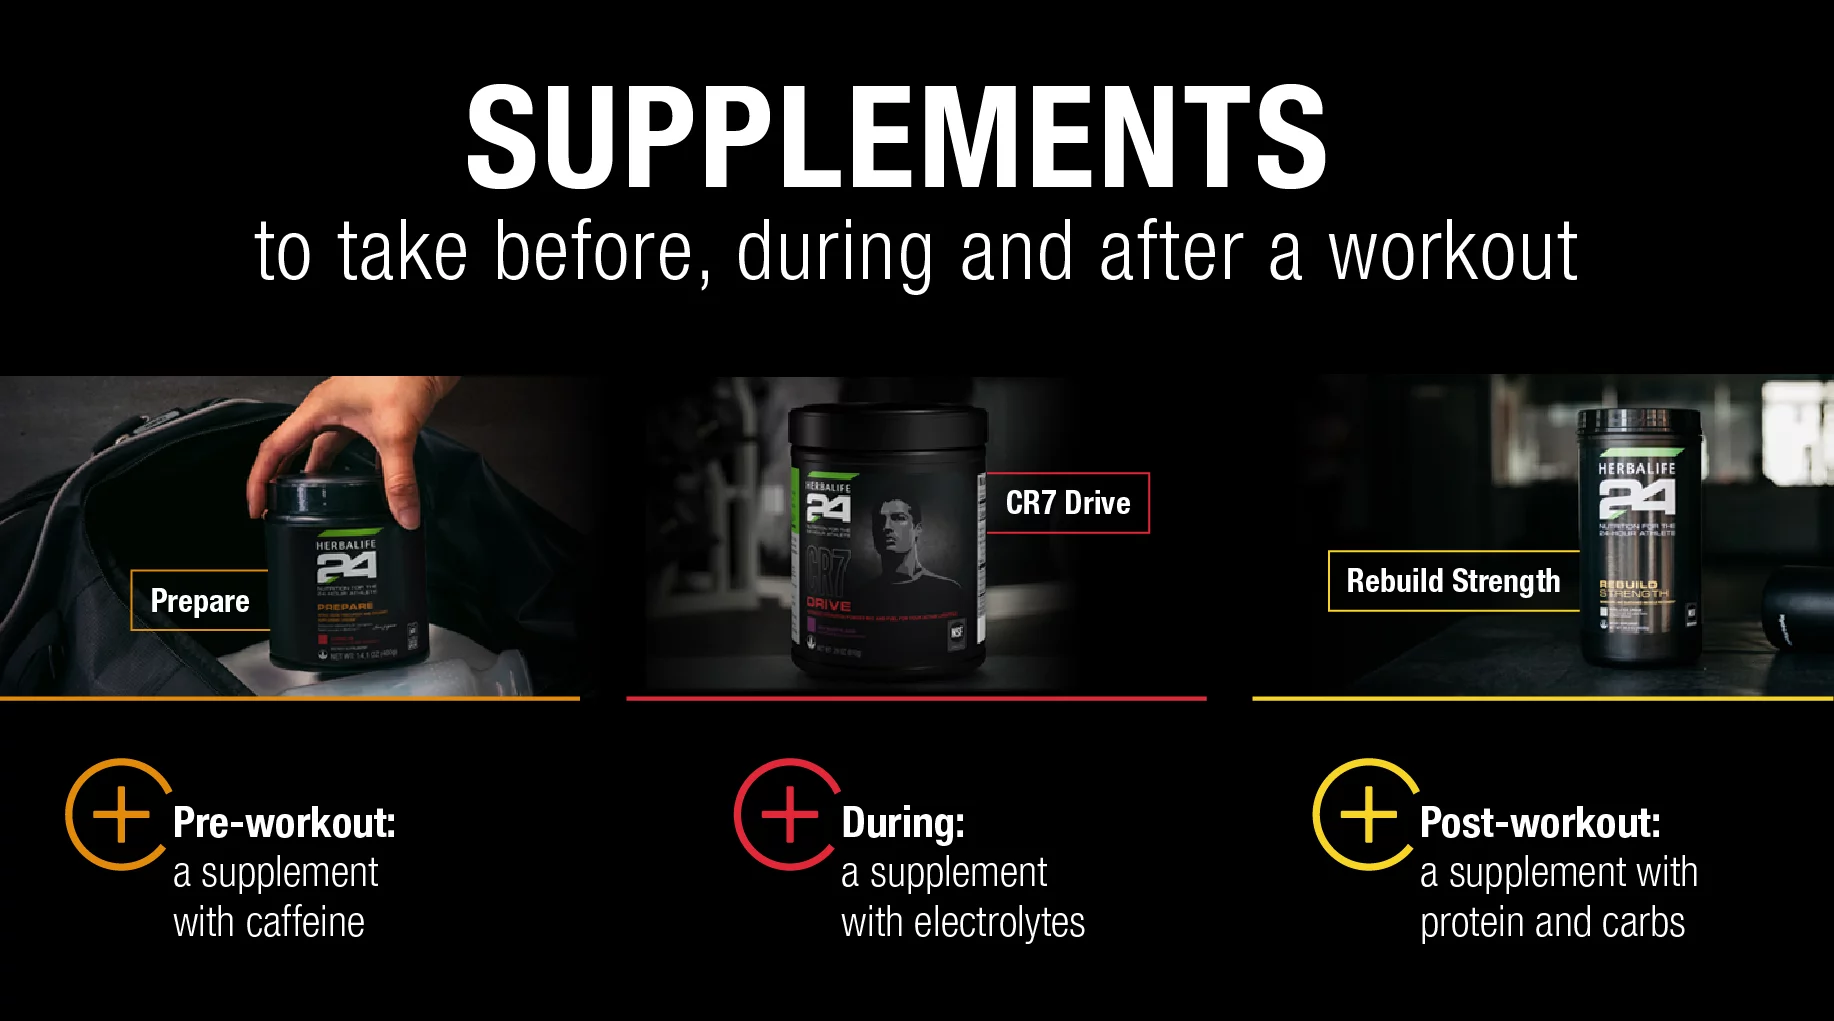 Why do people take supplements before a workout?